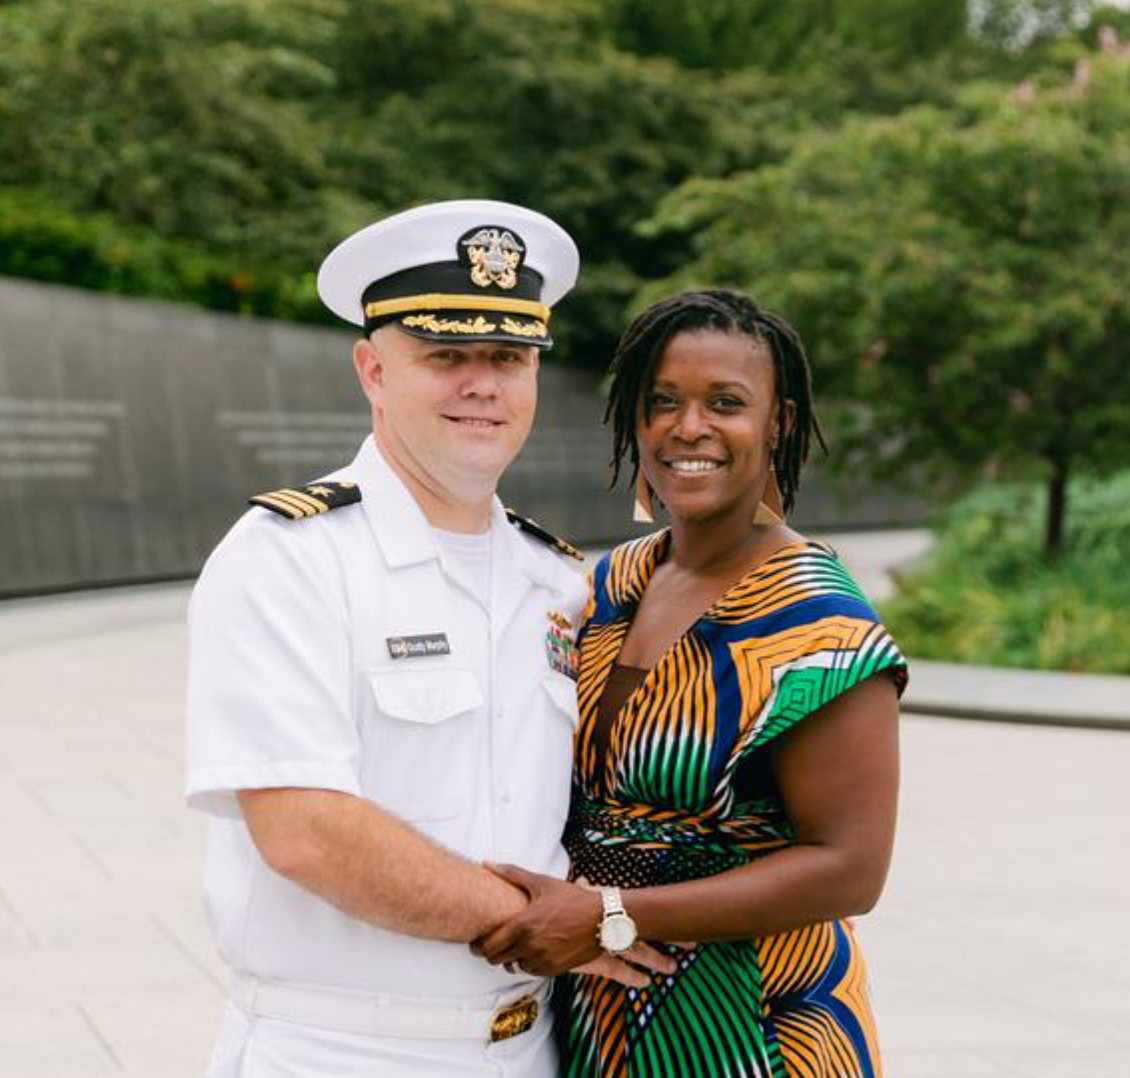 Tonya Murphy poses with her husband Scotty, a Navy commander, in Washington, D.C. Murphy, a fellow with Blue Star Families, said she and her husband balked at assignments to bases in southeast Georgia and southwest Tennessee out of fears of racial discrimination being directed at their three sons. (Tonya Murphy/ Blue Star Families)